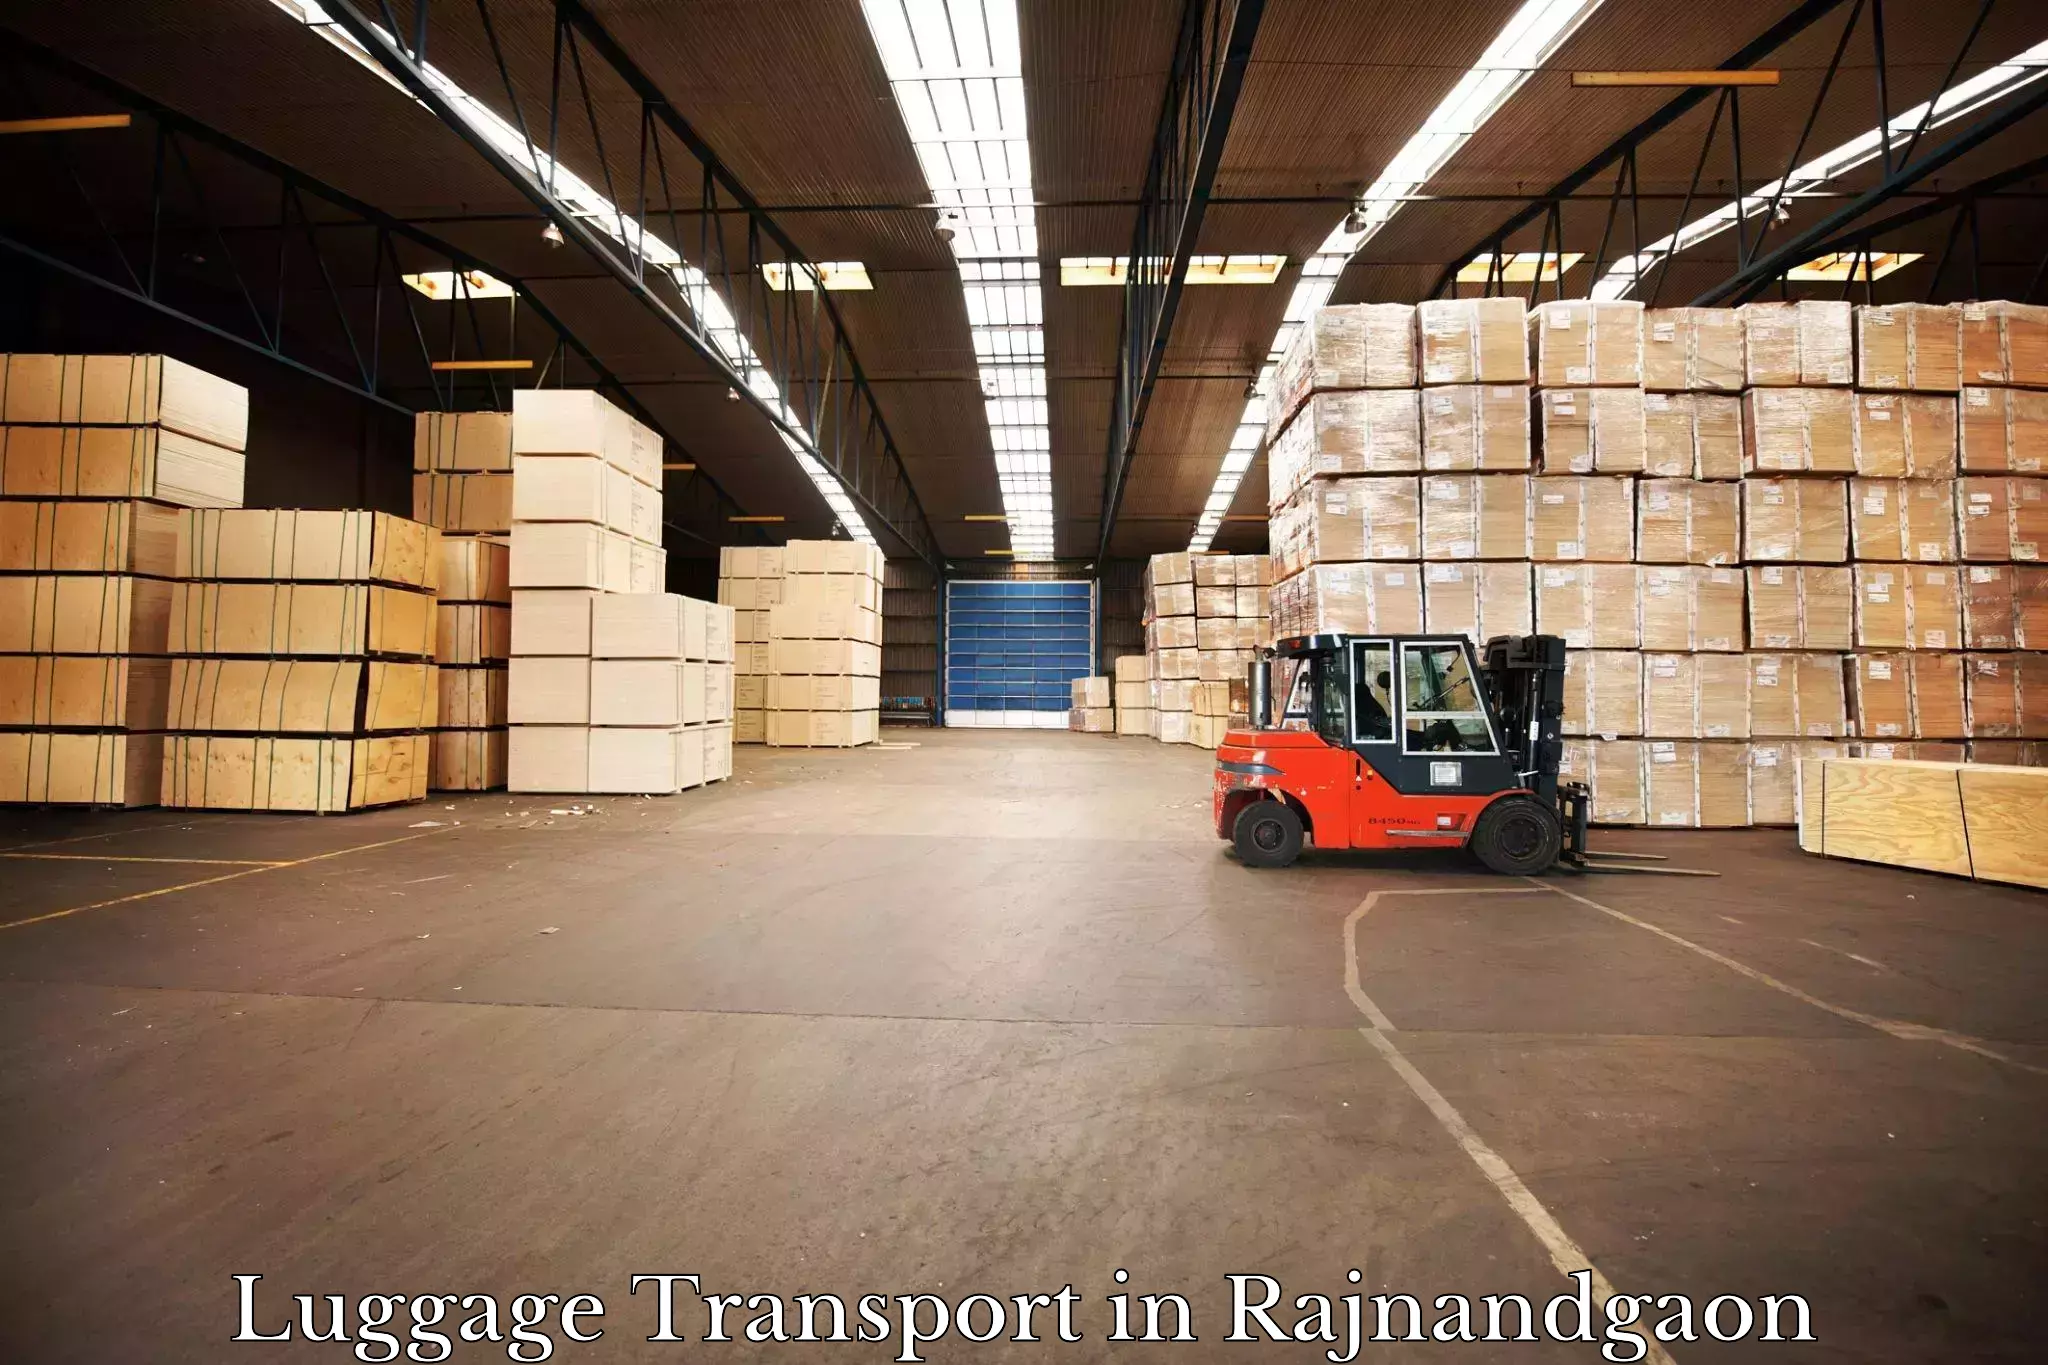 Luggage storage and delivery in Rajnandgaon